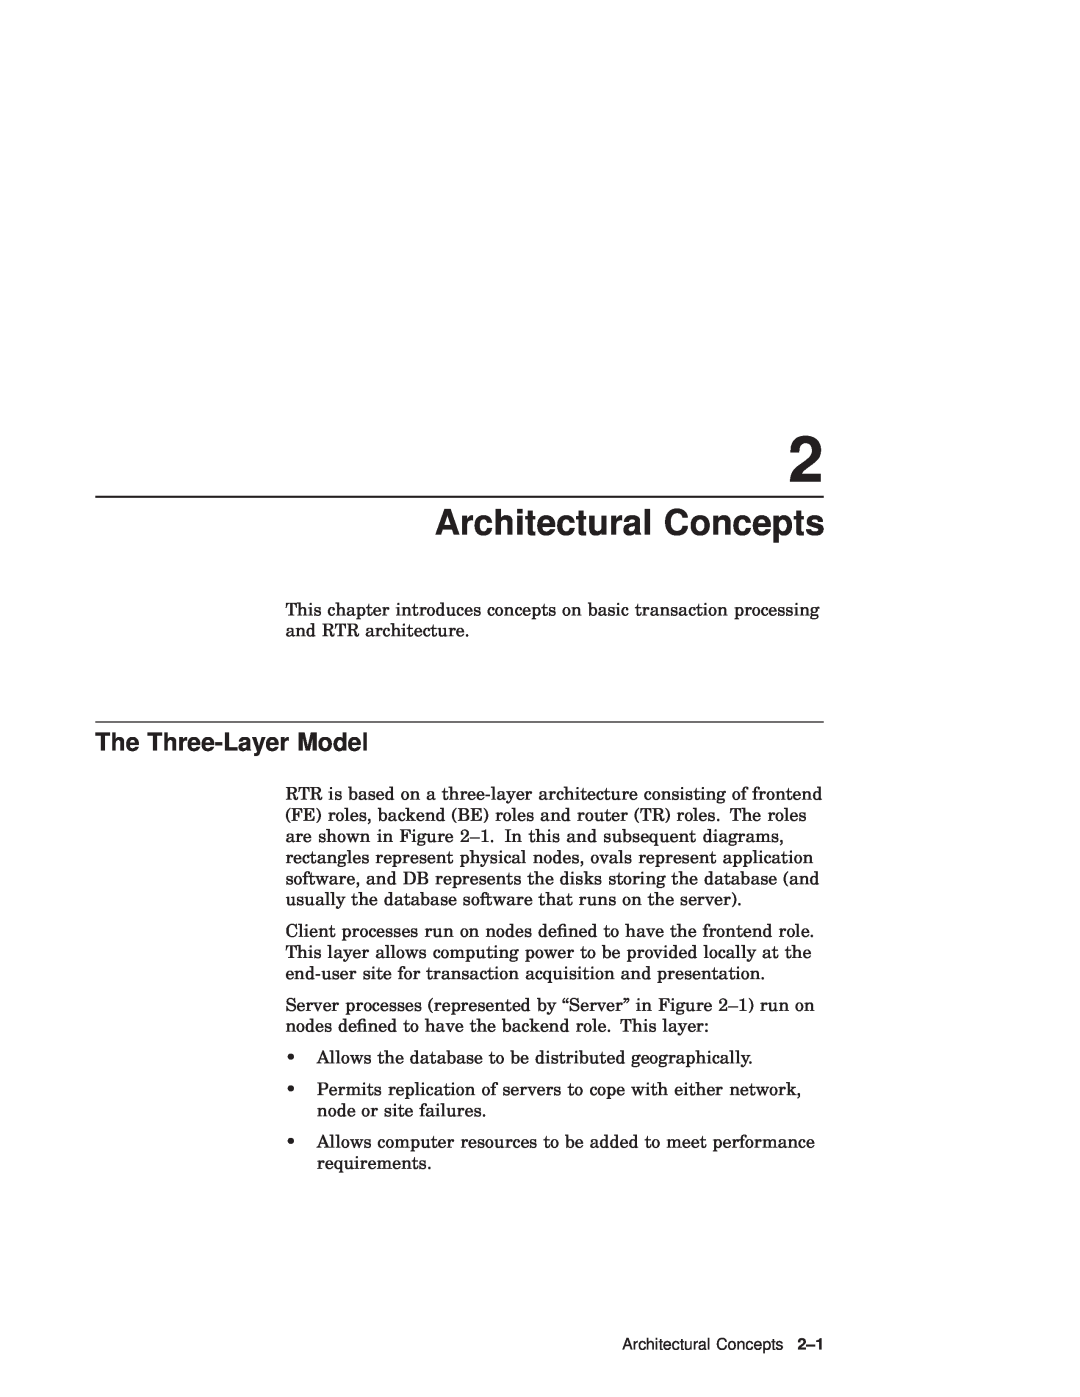 Compaq Reliable Transaction Router manual Architectural Concepts, The Three-Layer Model 